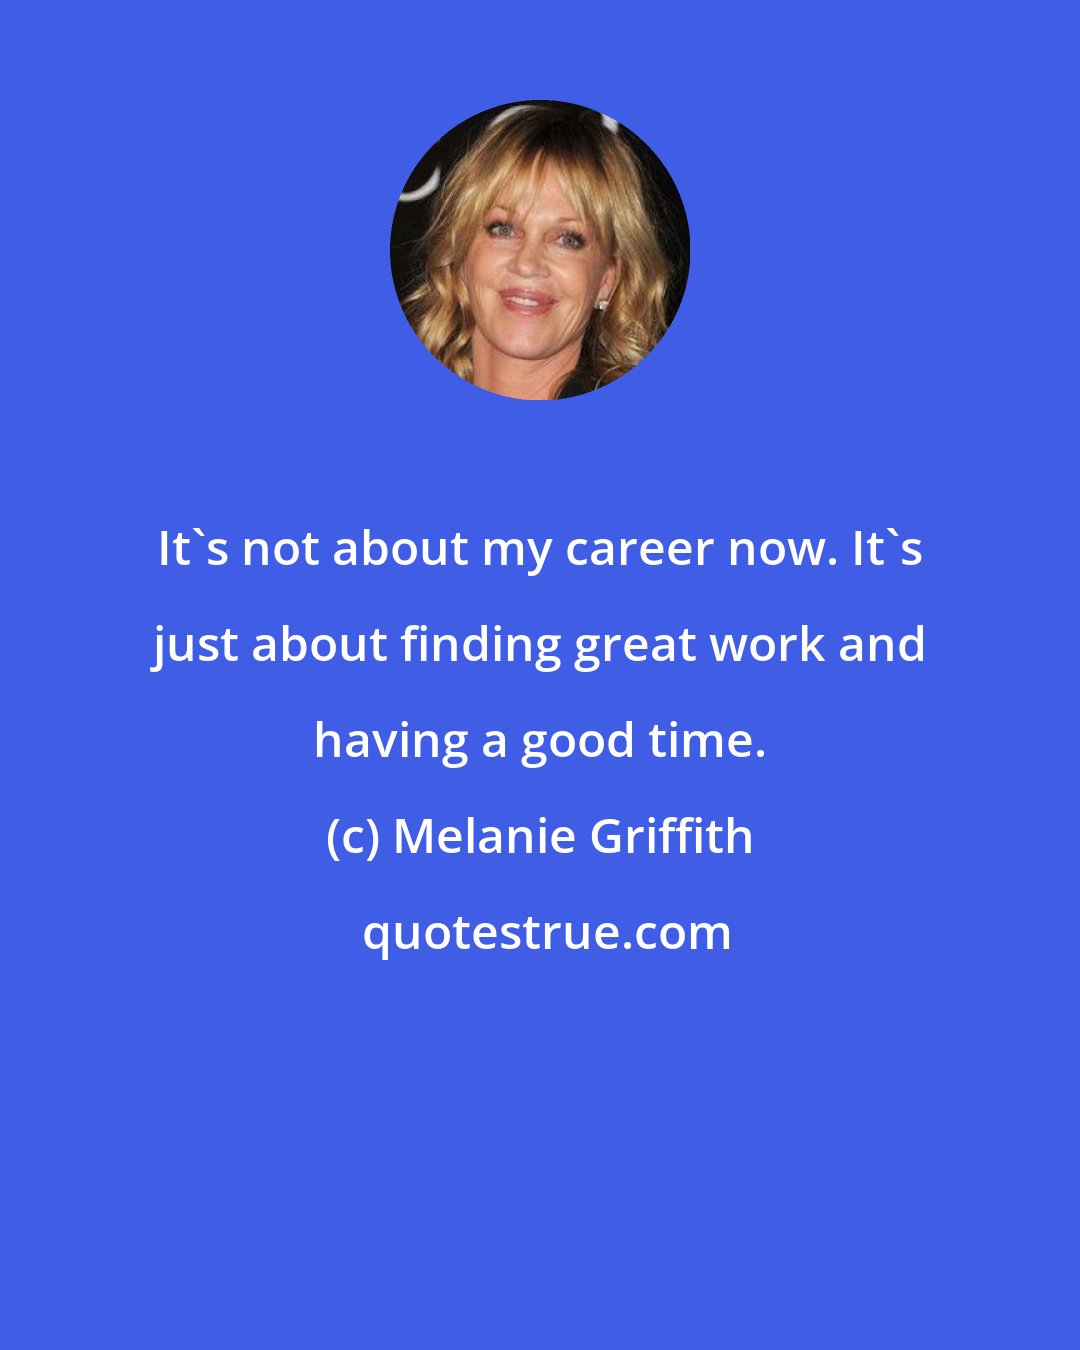 Melanie Griffith: It's not about my career now. It's just about finding great work and having a good time.